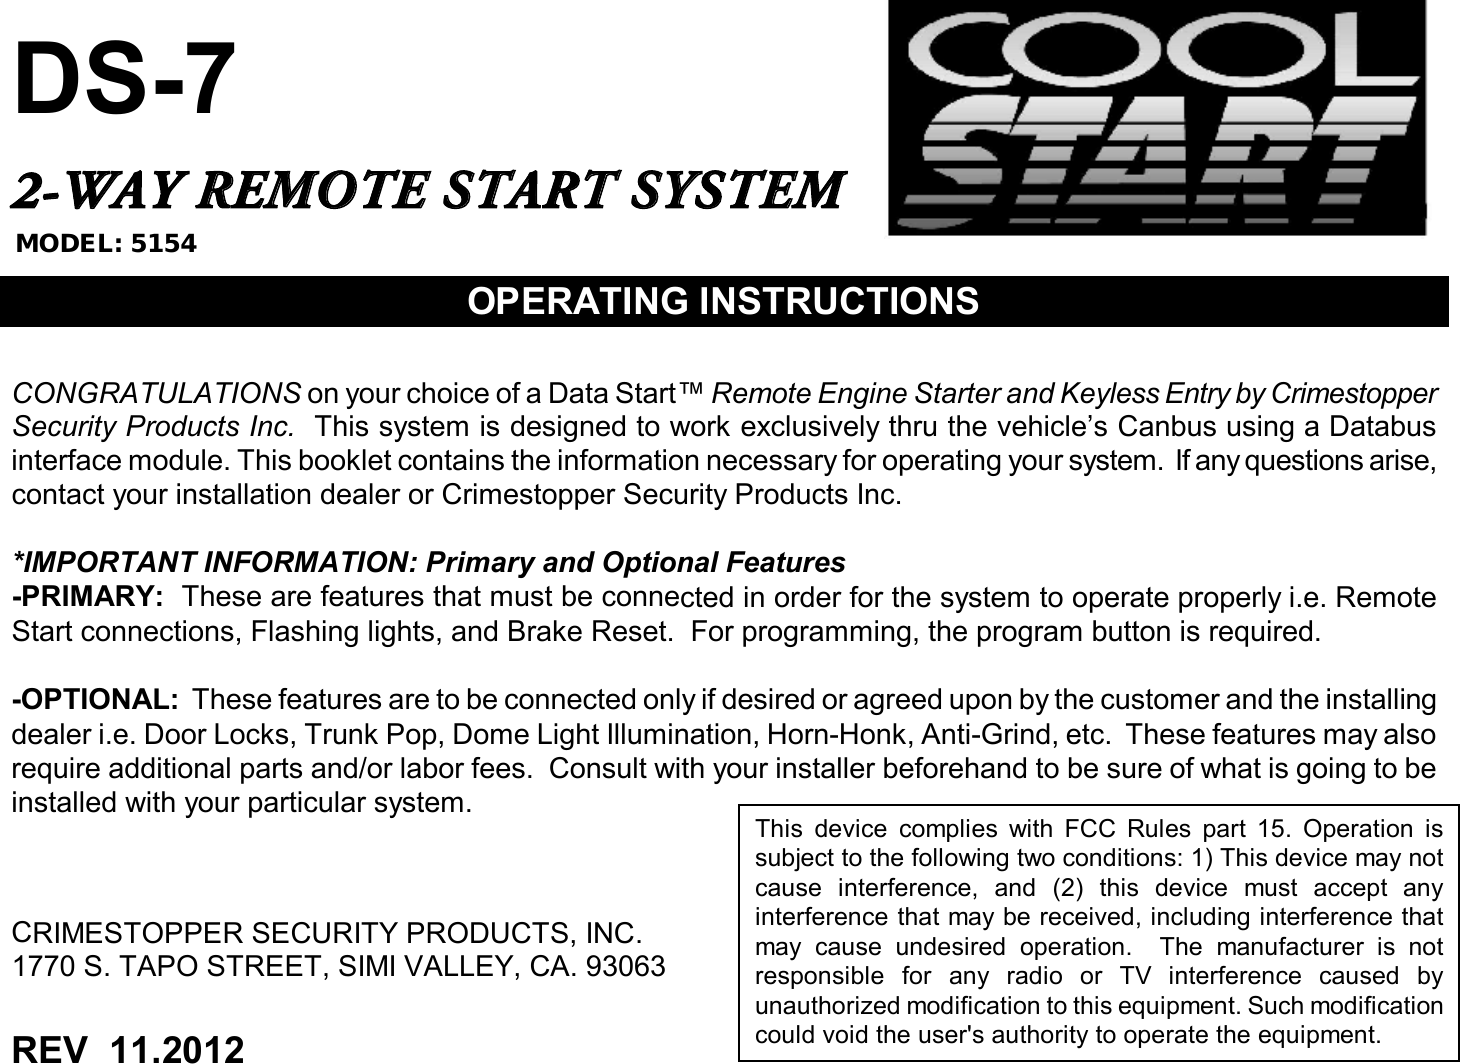 DS-72-WAY REMOTE START SYSTEMOPERATING INSTRUCTIONSCONGRATULATIONS on your choice of a Data Start™ Remote Engine Starter and Keyless Entry by CrimestopperSecurity Products Inc. This system is designed to work exclusively thru the vehicle’s Canbus using a Databusinterface module. This booklet contains the information necessary for operating your system. If any questions arise,contact your installation dealer or Crimestopper Security Products Inc.*IMPORTANT INFORMATION: Primary and Optional Features-PRIMARY: These are features that must be connected in order for the system to operate properly i.e. RemoteStart connections, Flashing lights, and Brake Reset. For programming, the program button is required.-OPTIONAL: These features are to be connected only if desired or agreedupon by the customer and the installingdealer i.e. Door Locks, Trunk Pop, Dome Light Illumination, Horn-Honk, Anti-Grind, etc. These features may alsorequire additional parts and/or labor fees. Consult with your installer beforehand to be sure of what is going to beinstalled with yourparticular system.CRIMESTOPPER SECURITY PRODUCTS, INC.1770 S. TAPO STREET, SIMI VALLEY, CA. 93063REV 11.2012This device complies with FCC Rules part 15. Operation issubject to the following two conditions: 1) This device may notcause interference, and (2) this device must accept anyinterference that may be received, including interference thatmay cause undesired operation. The manufacturer is notresponsible for any radio or TV interference caused byunauthorized modification to this equipment. Such modificationcould void the user&apos;s authority to operate the equipment.MODEL: 5154